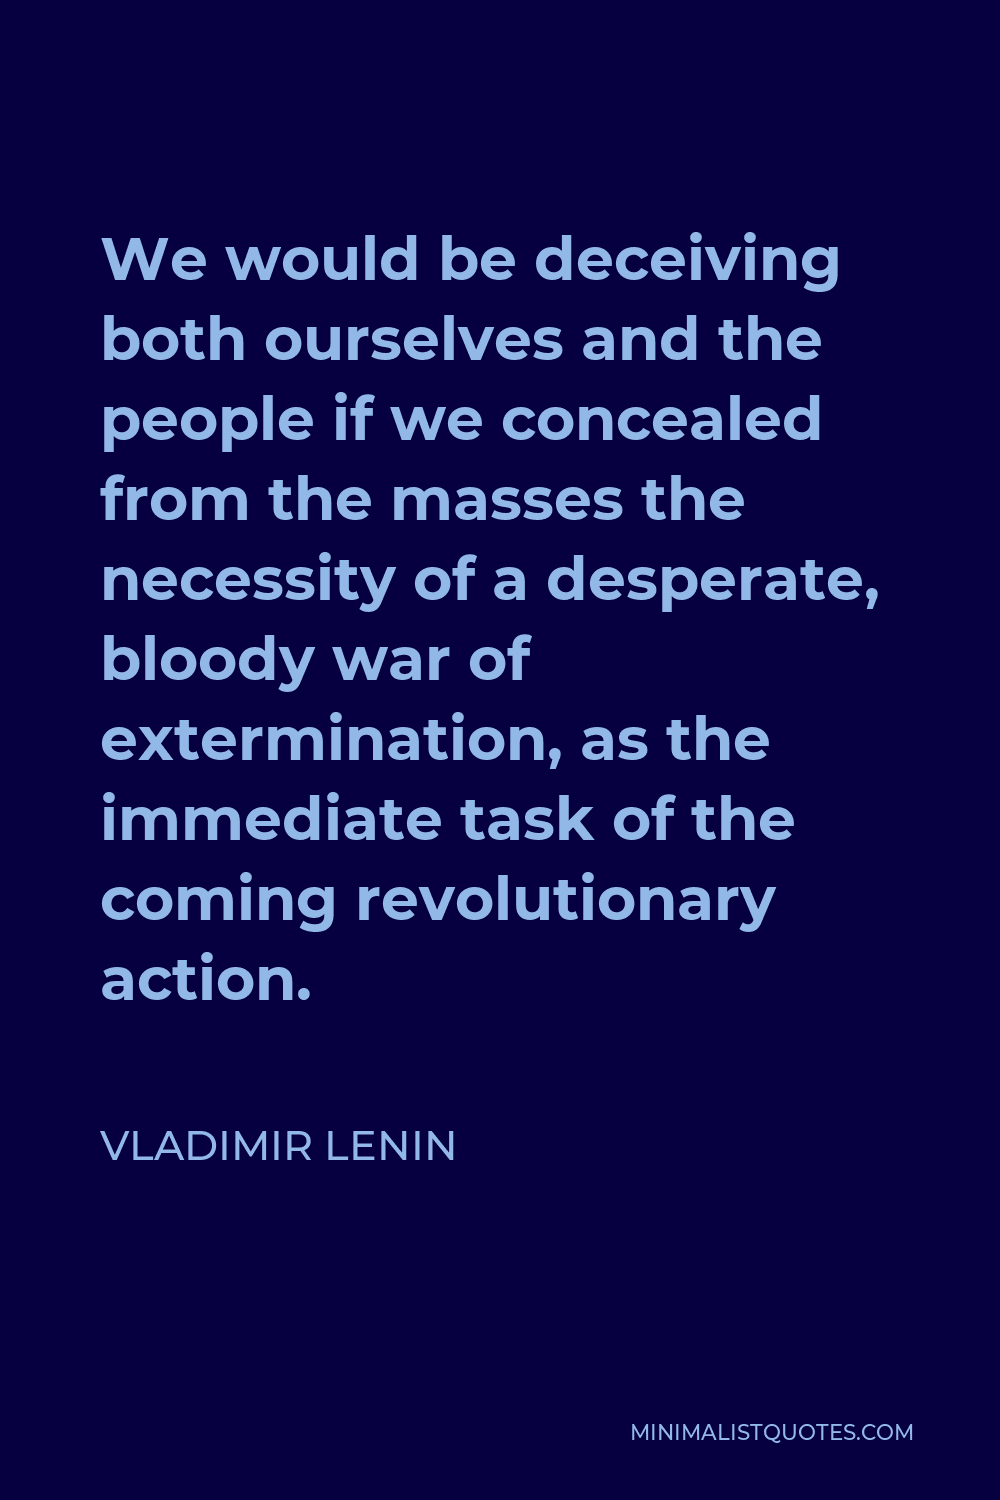 Vladimir Lenin Quote - We would be deceiving both ourselves and the people if we concealed from the masses the necessity of a desperate, bloody war of extermination, as the immediate task of the coming revolutionary action.